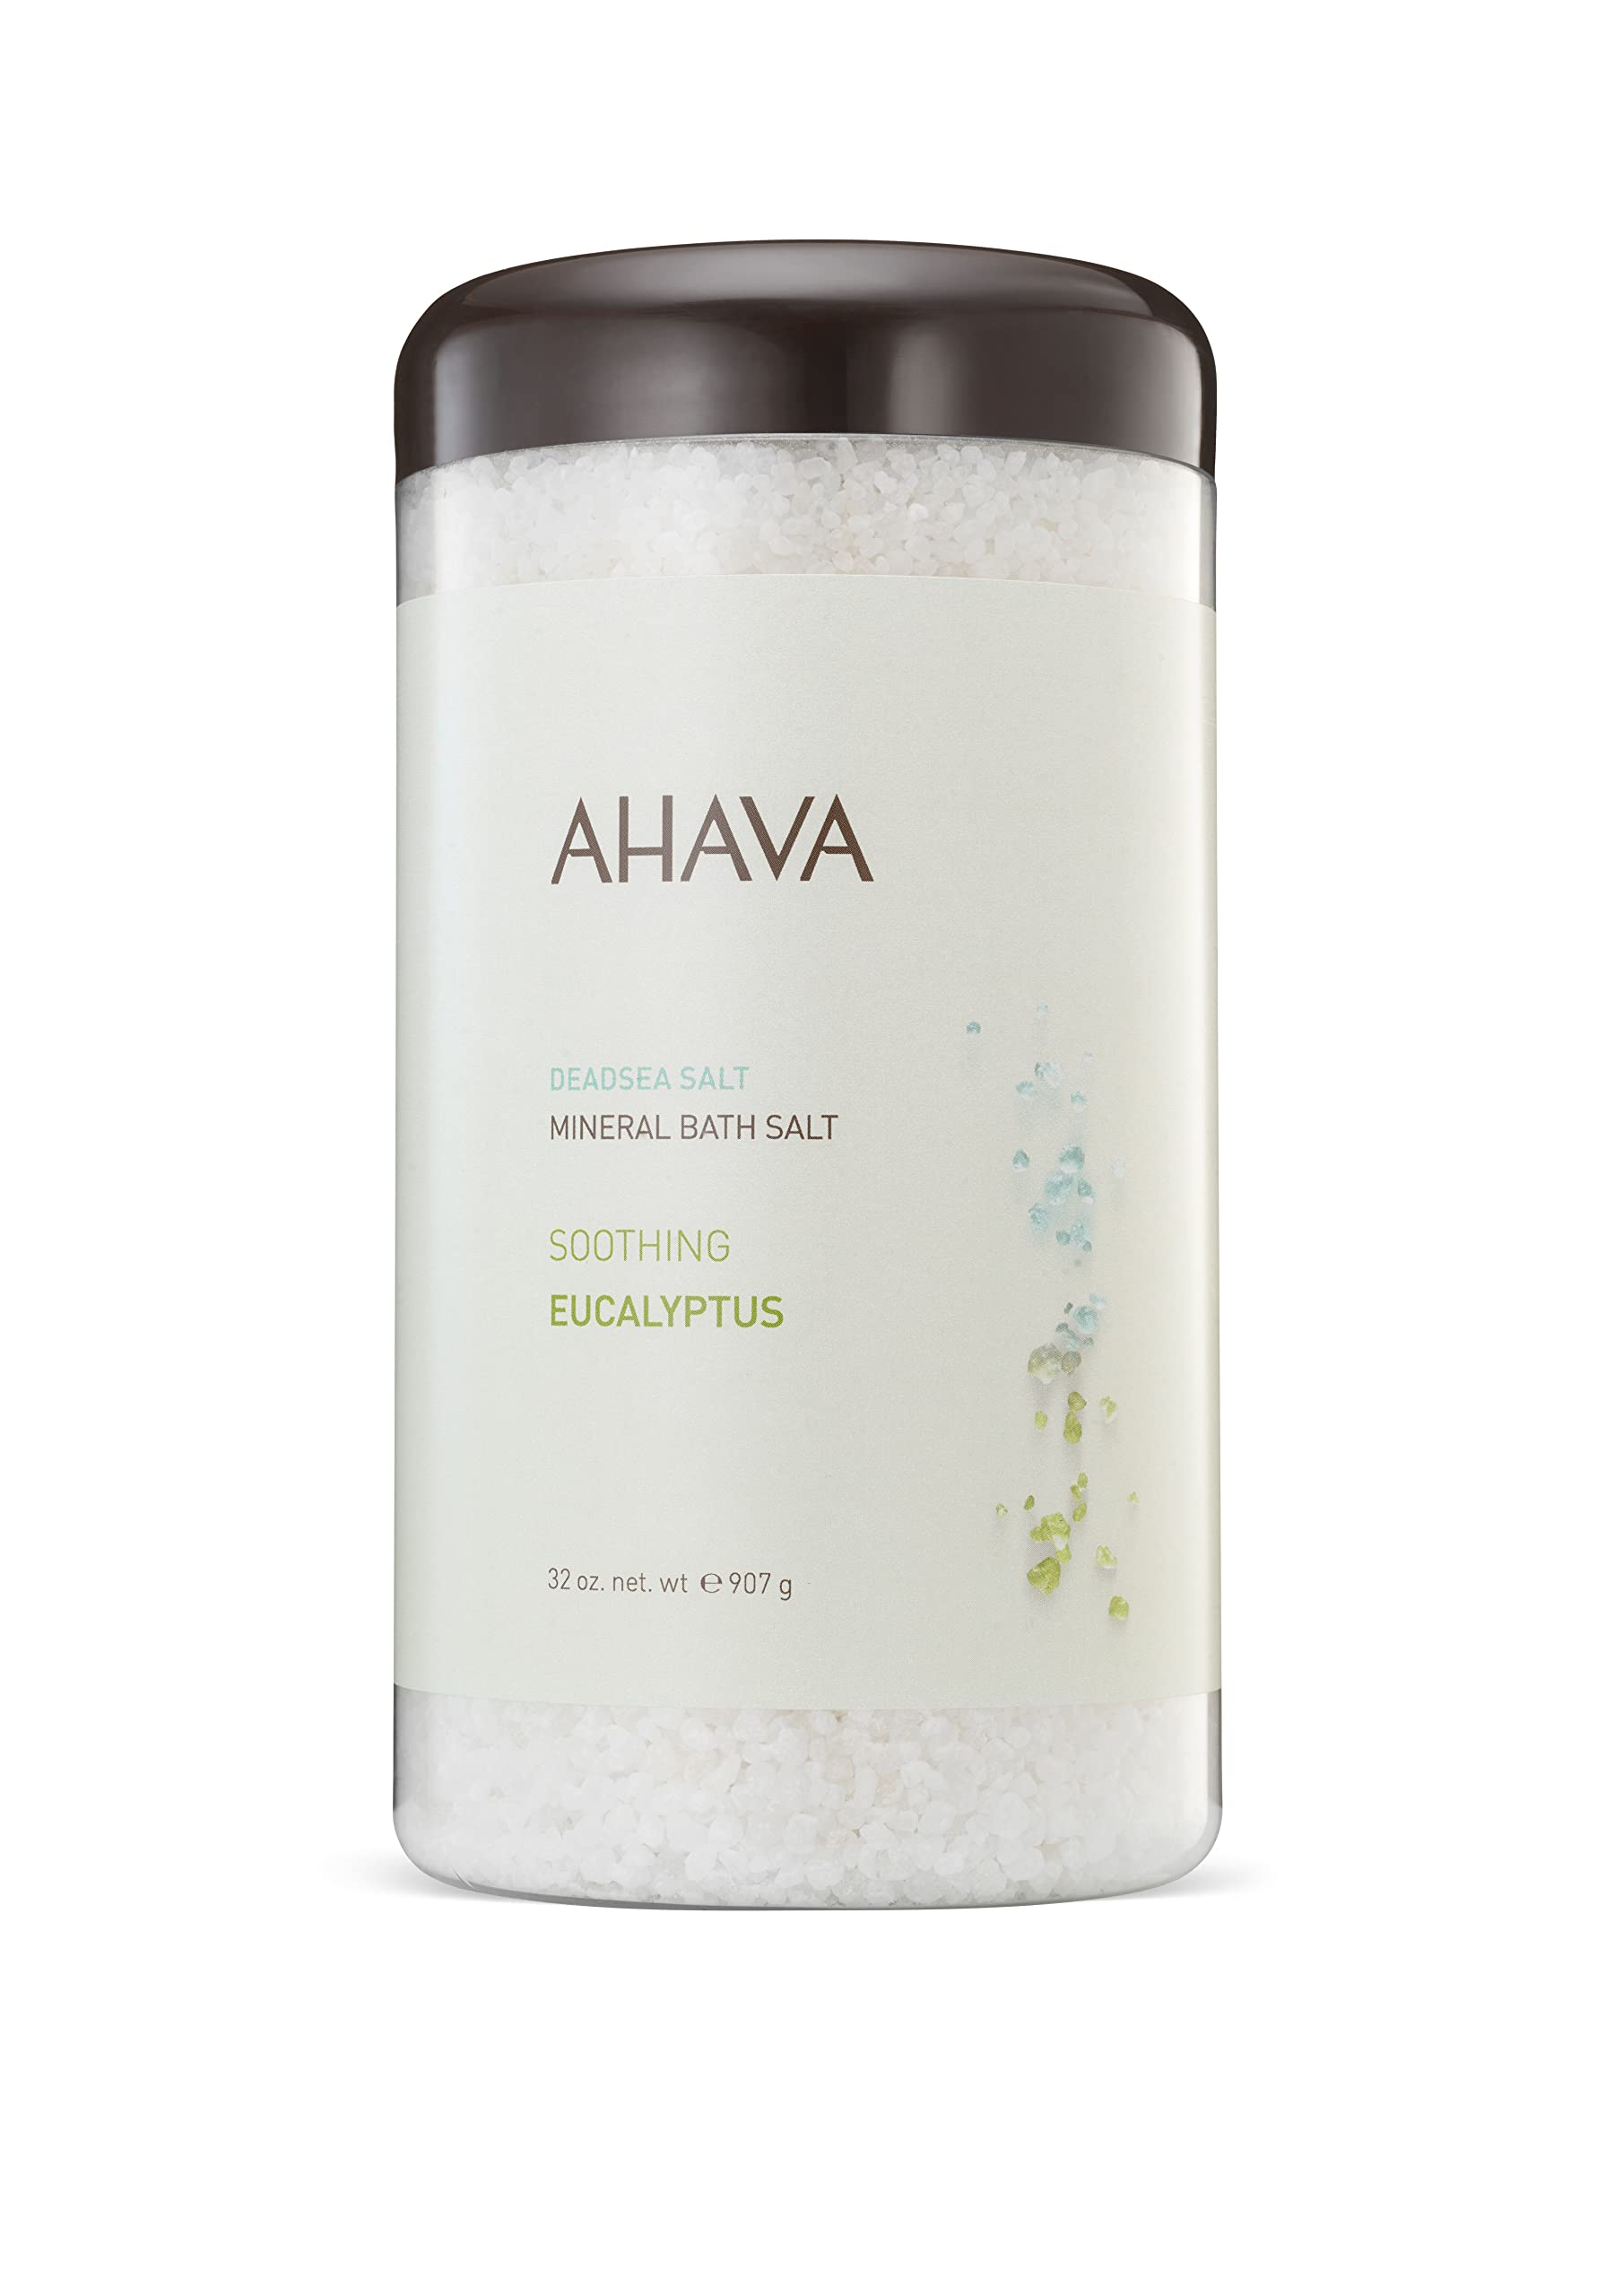 AHAVA Dead Sea Mineral Bath Salt, Soothing Eucalyptus - Intense Relaxation for Body & Mind, Elevates Moisture, Softens & Eases Sore Muscles, Enriched by Exclusive Dead Sea Salt & Osmoter blend, 32 Oz